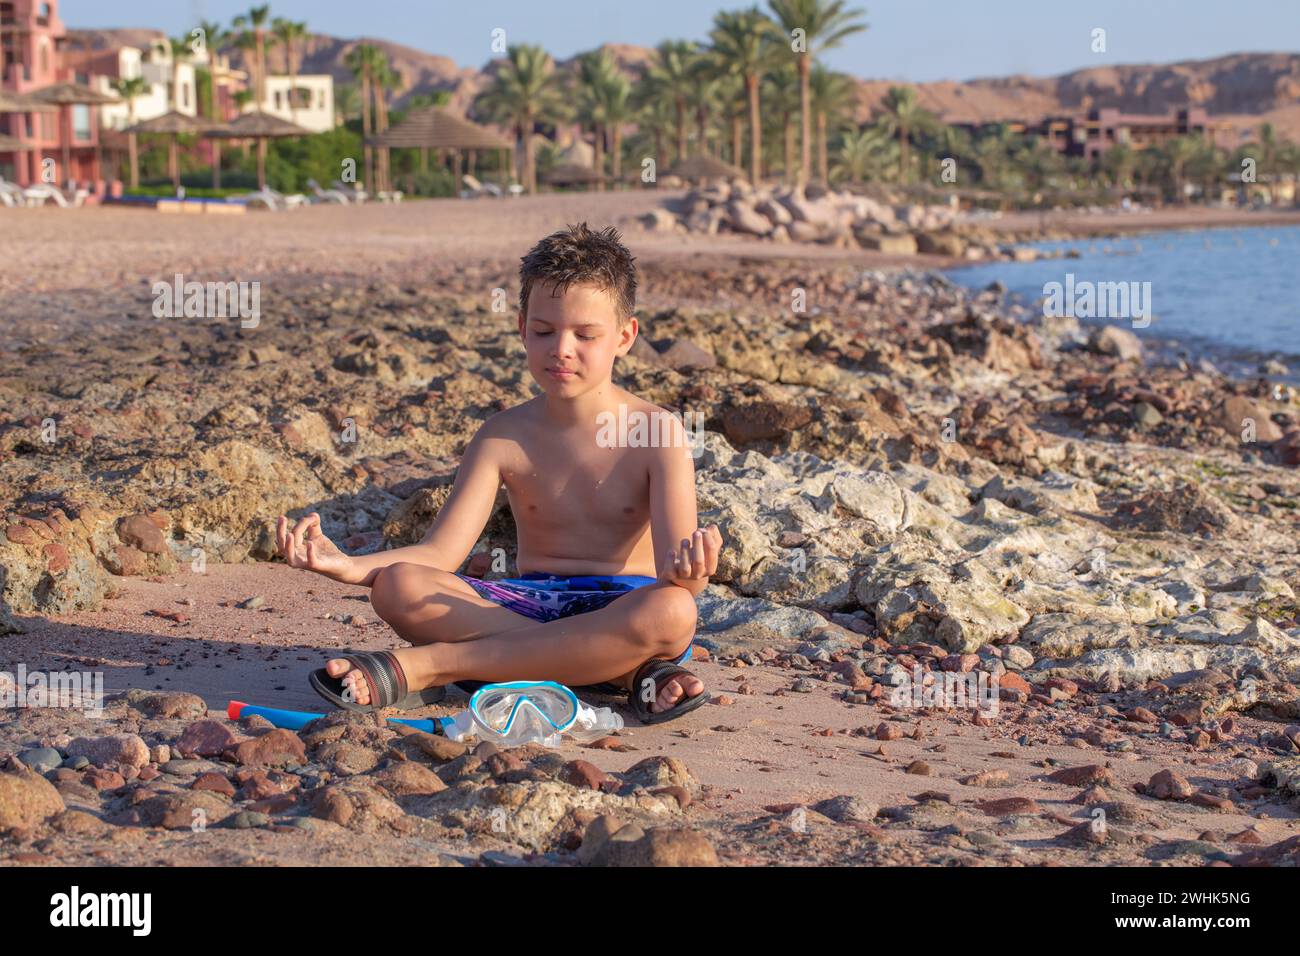 A little boy of 9 years old is sitting at the beach of the seaside along the Red Sea, Tala Bay, Aqaba, Jordan Stock Photo